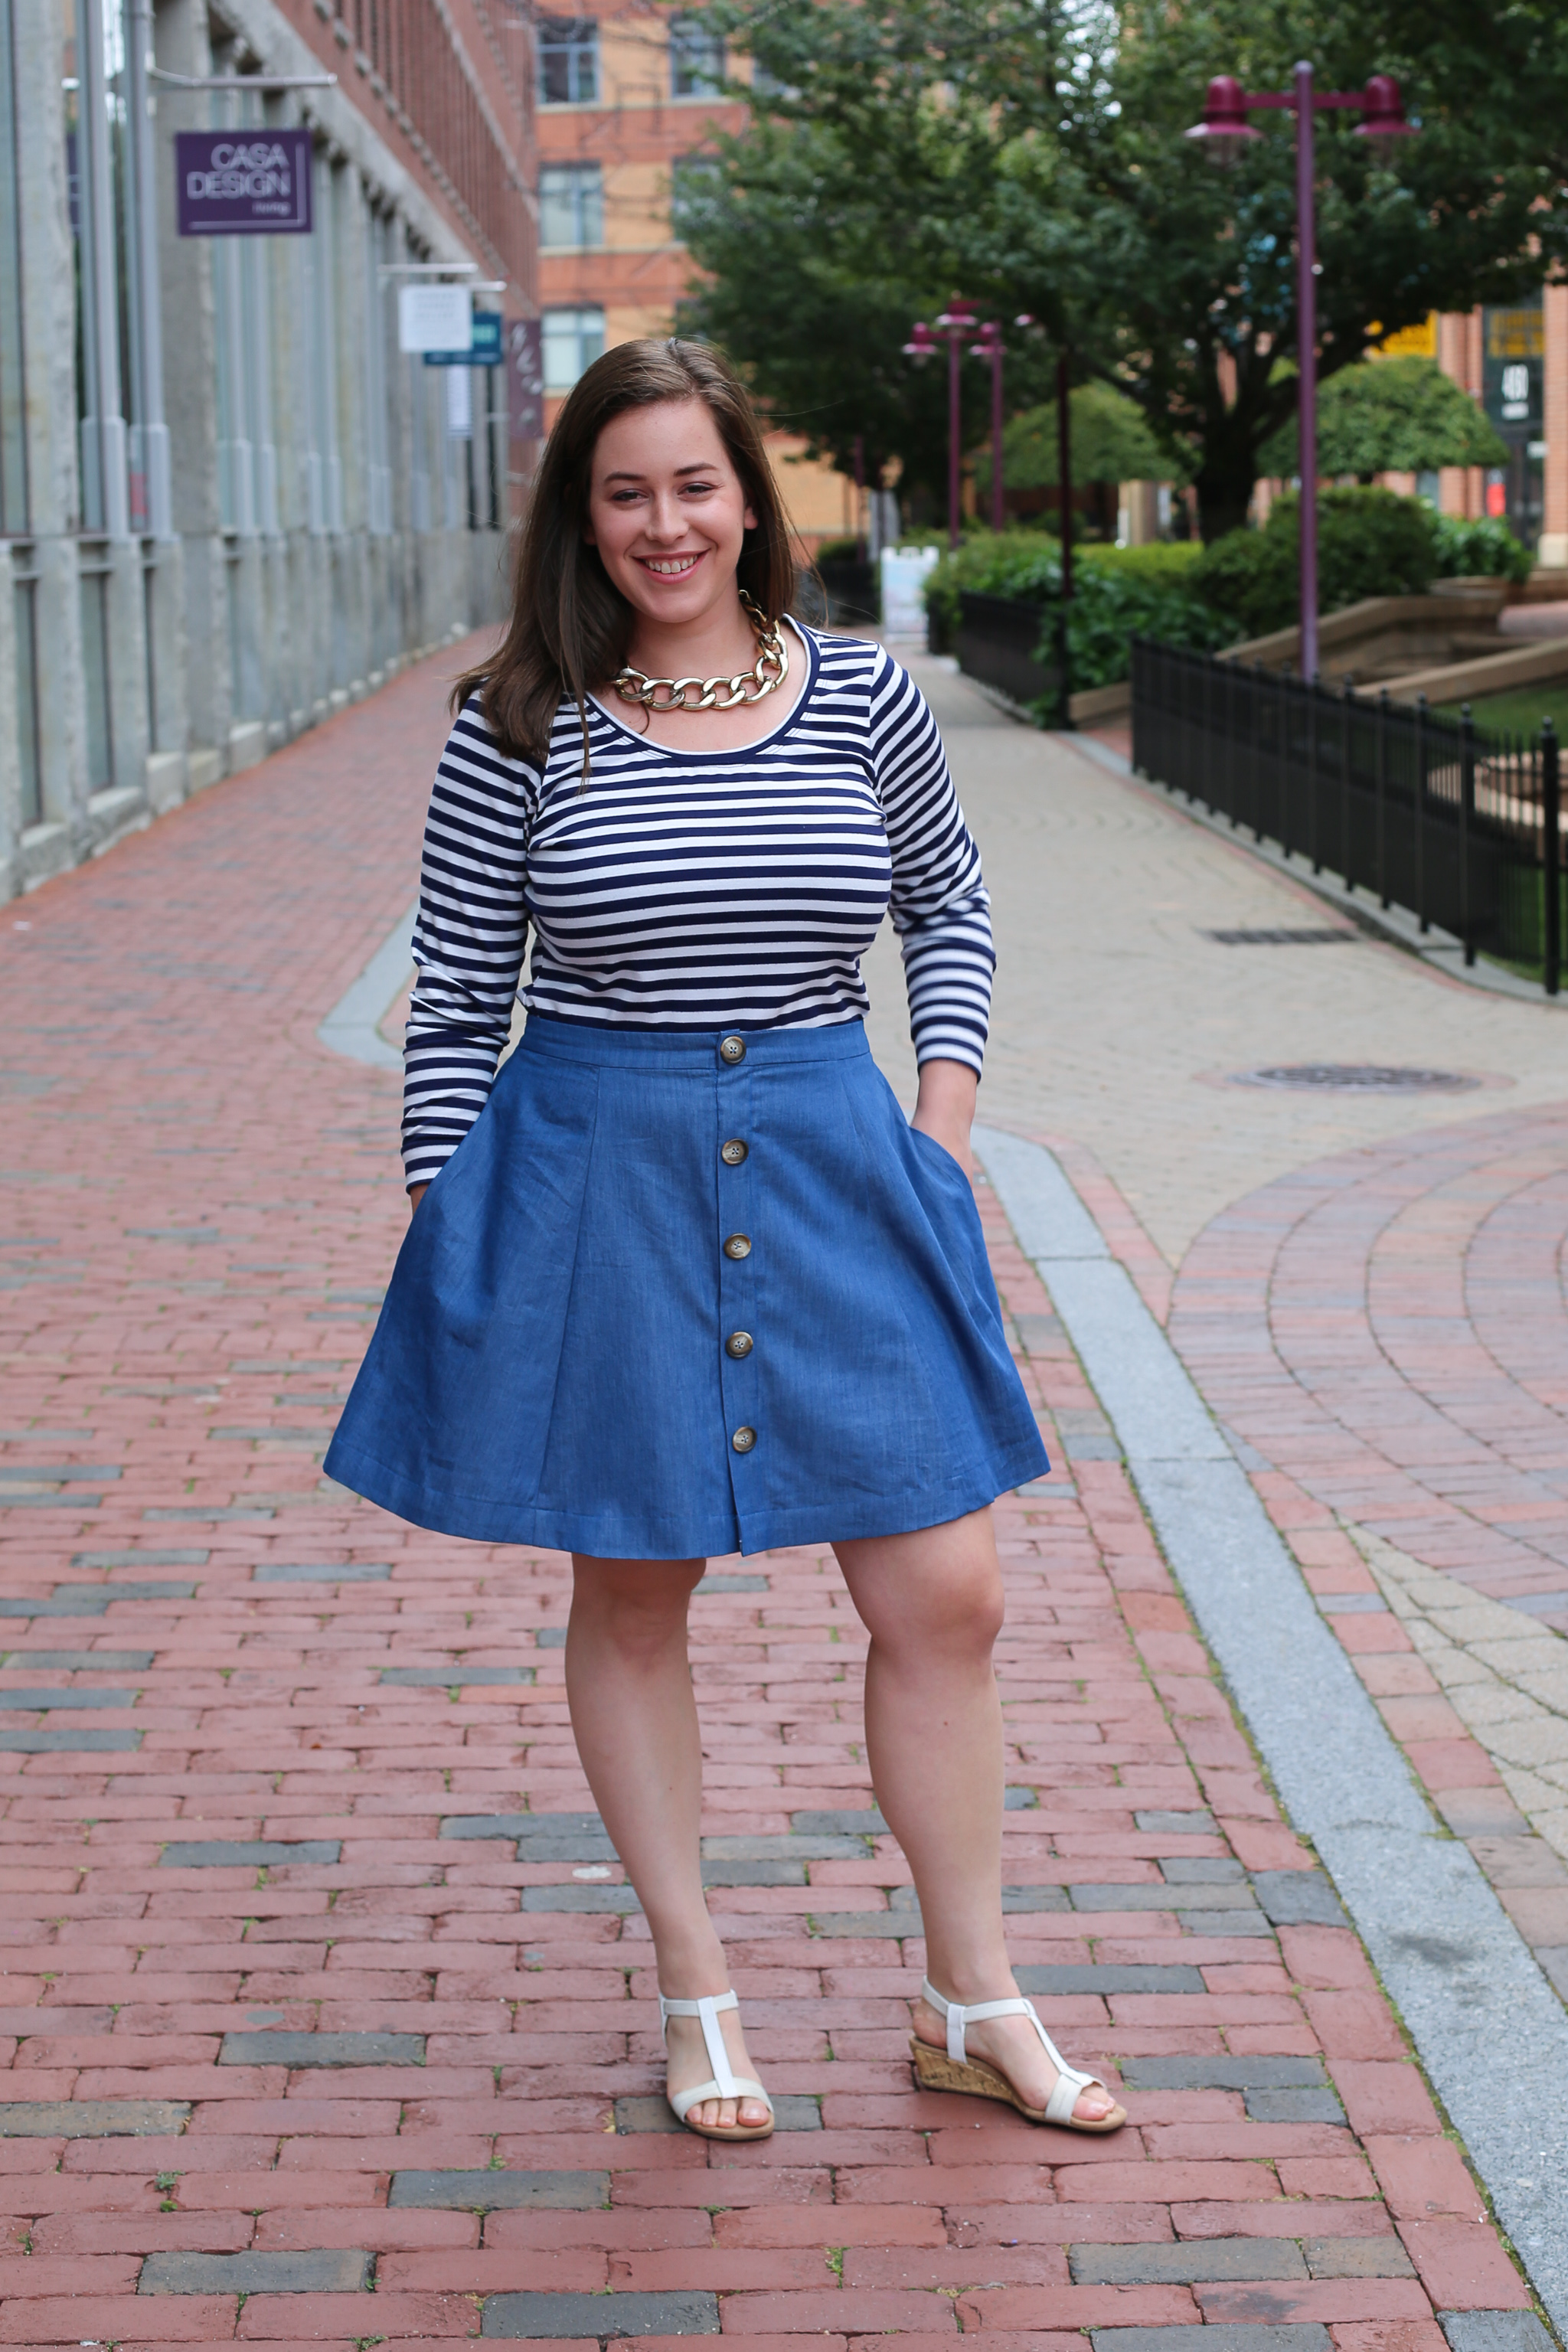 Holyoke Variation: A Swingy Above-the-Knee Skirt | Cashmerette